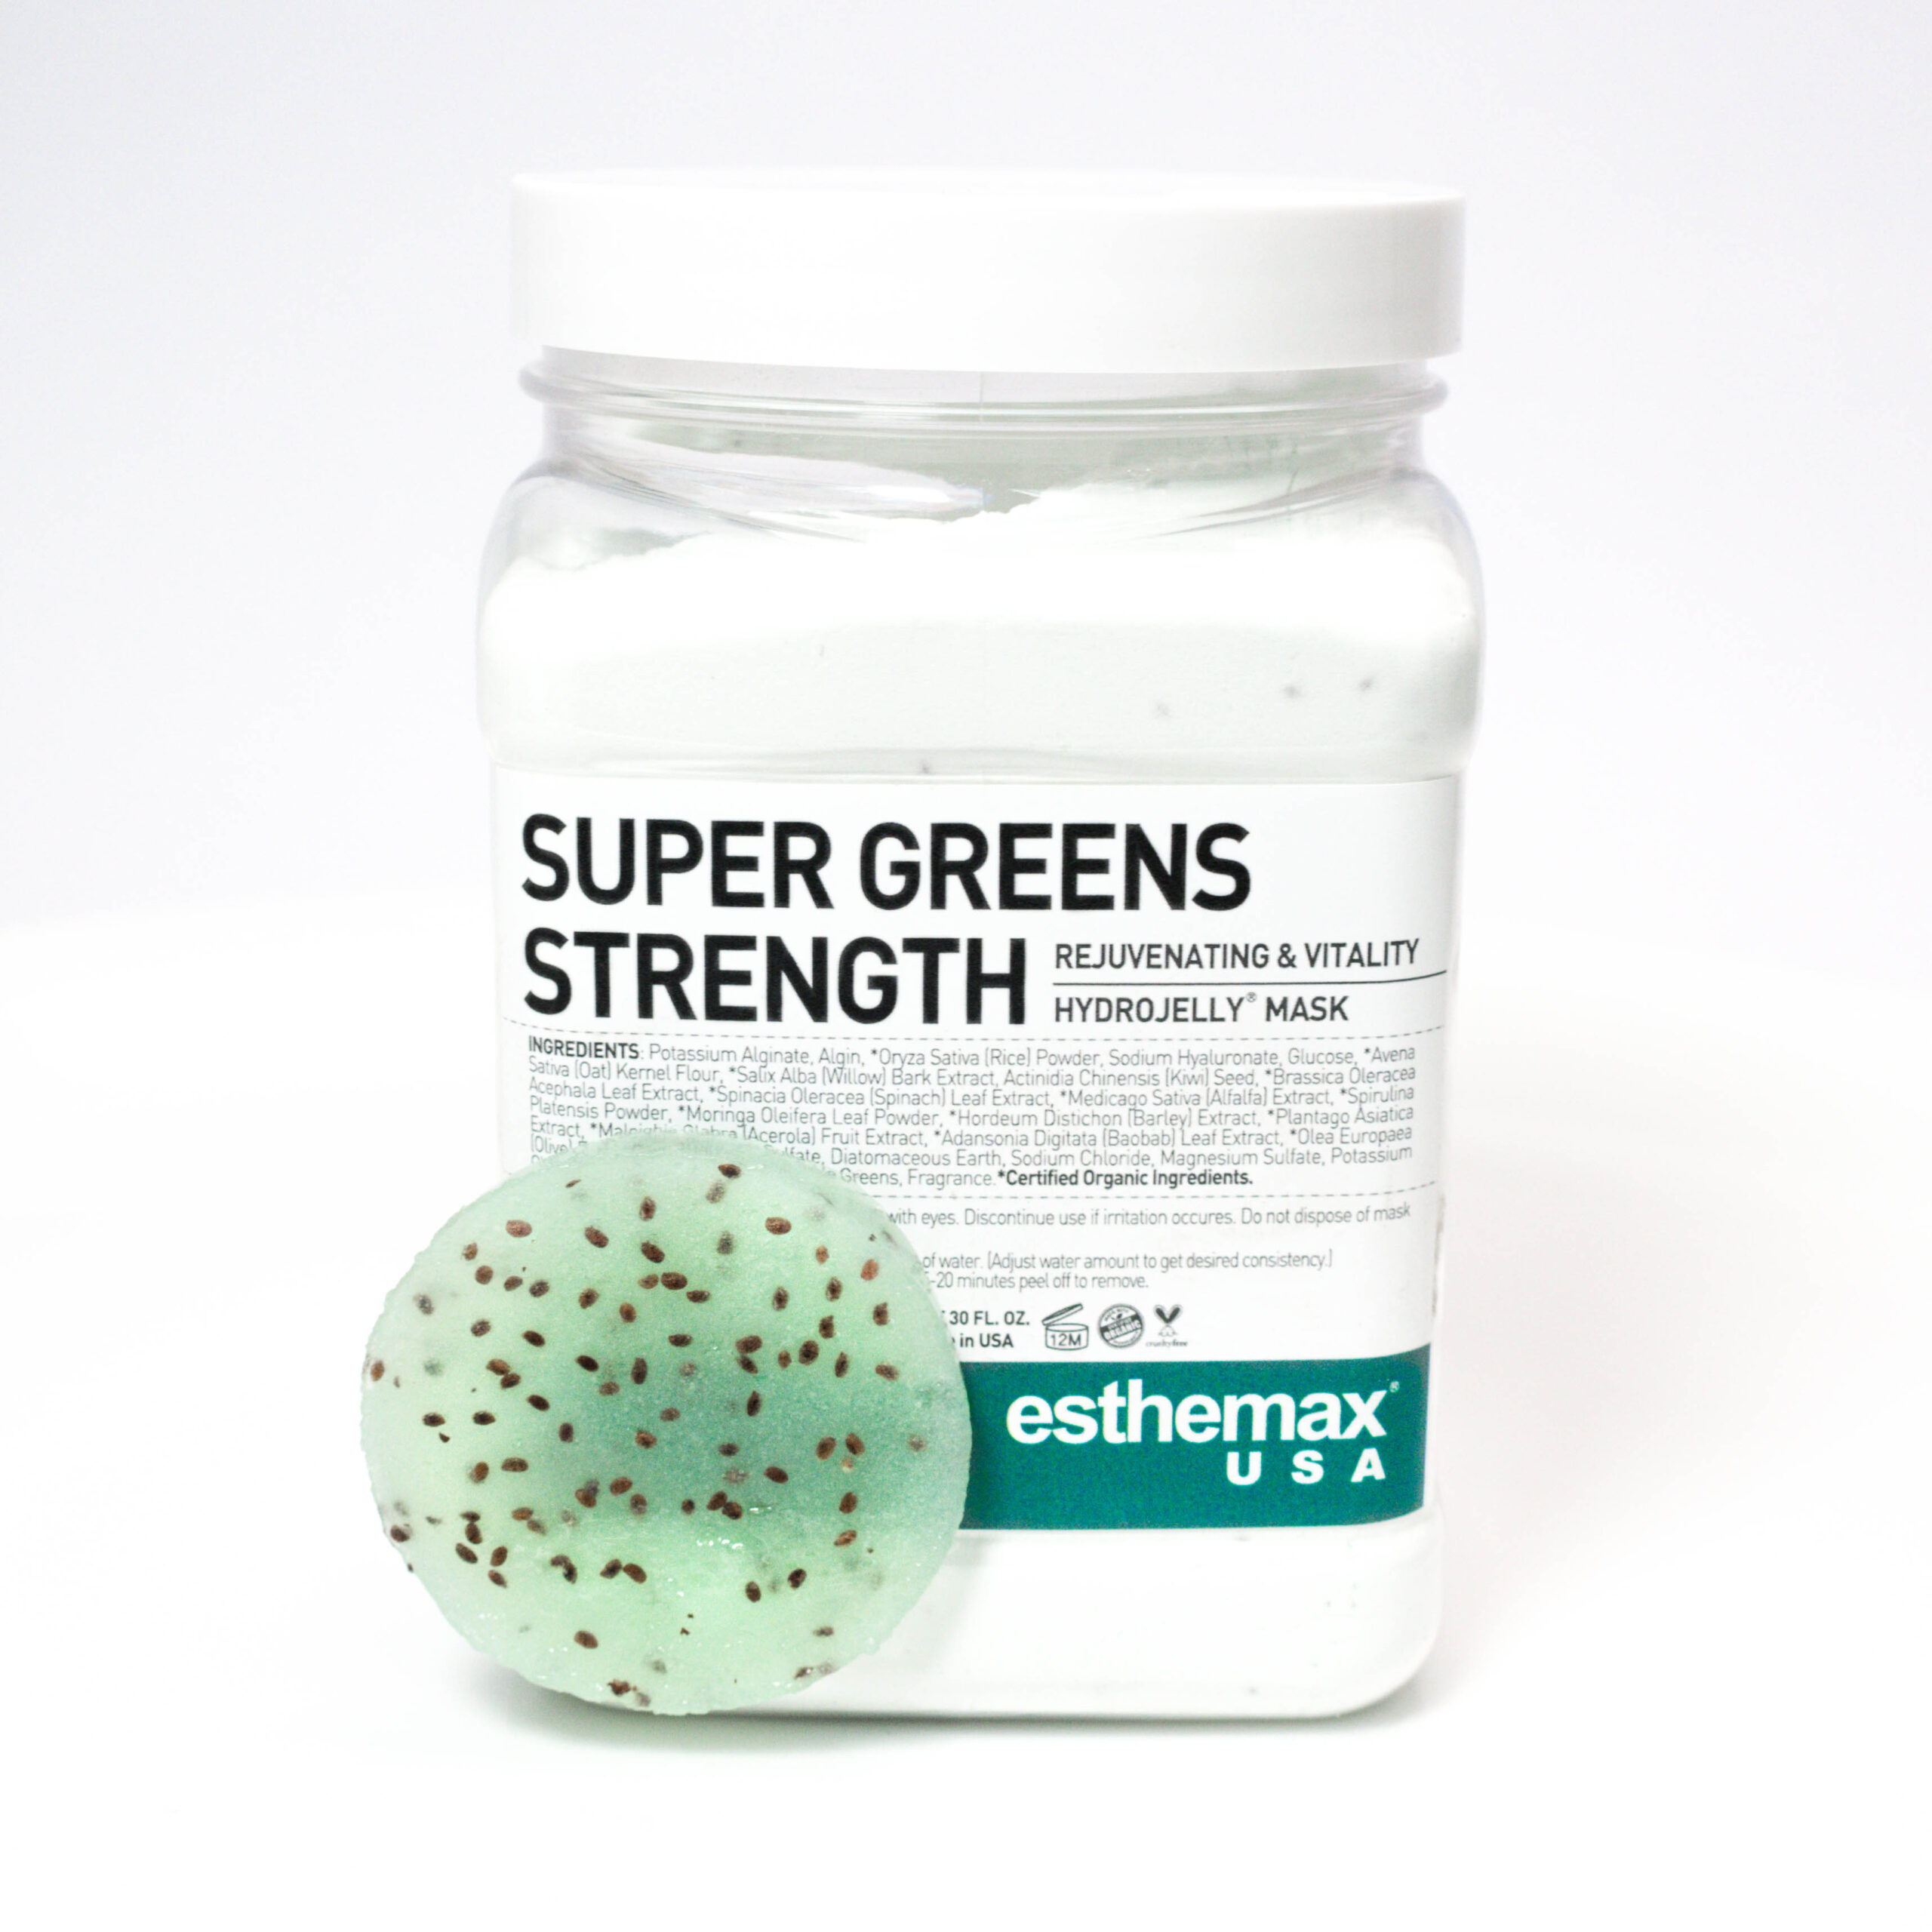 SUPER GREENS STRENGHT Hydrojelly®